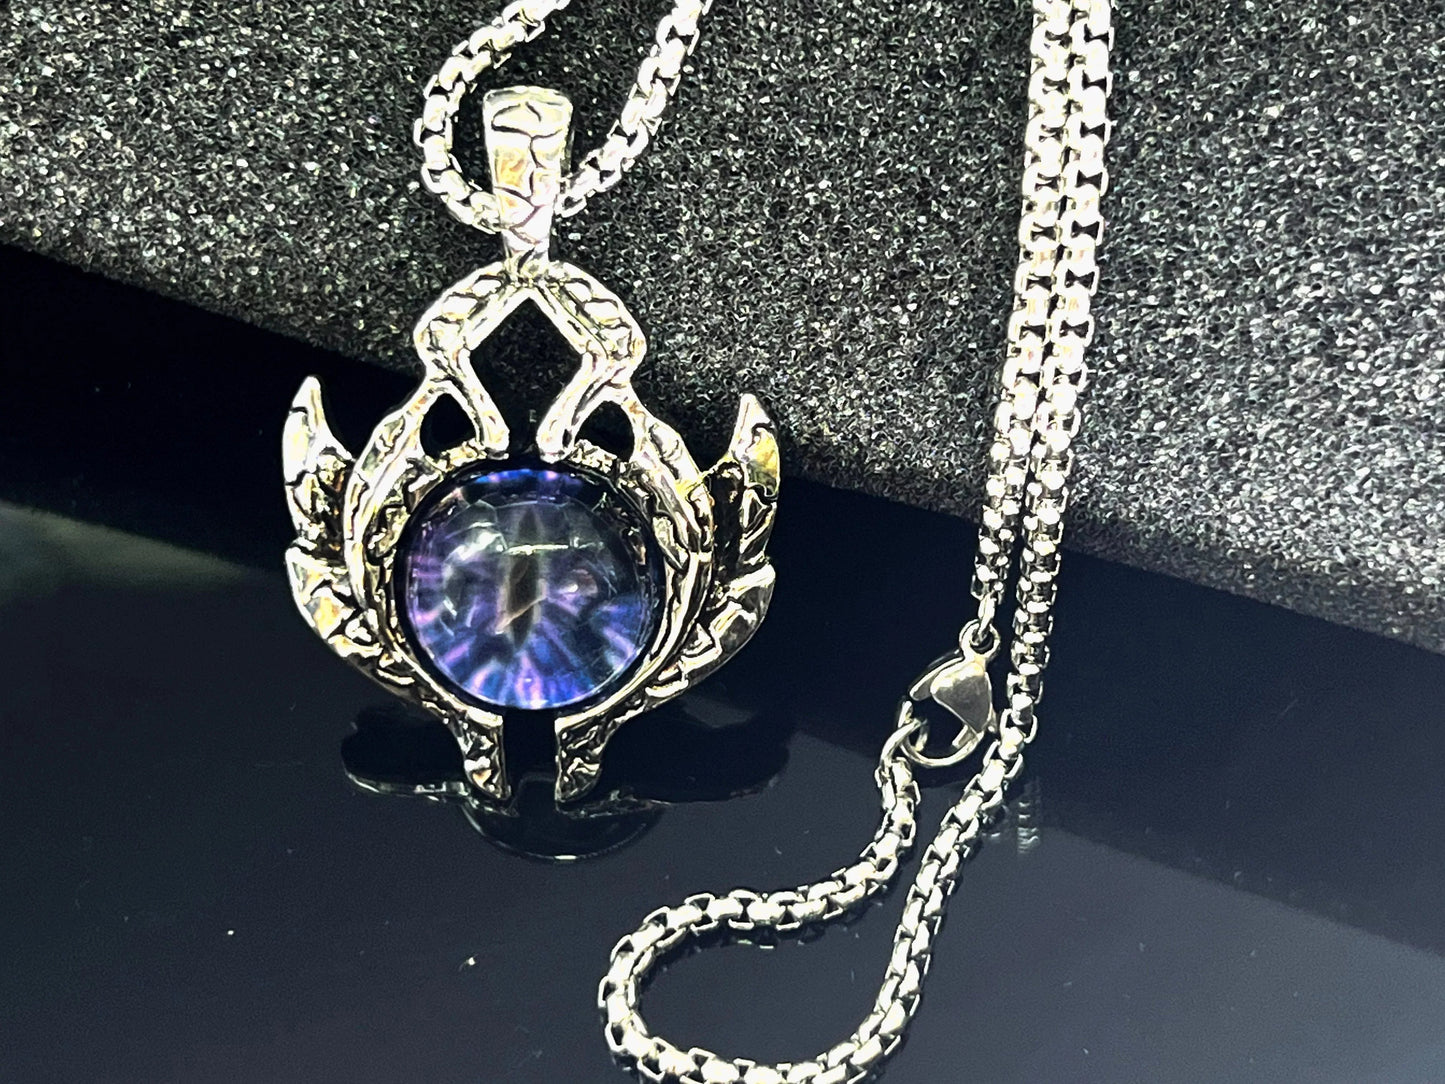 THE MEN THING Alloy Purple eyes Pendant with Pure Stainless Steel 24inch Chain for Men, European trending Style - Round Box Chain & Pendant for Men & Boy